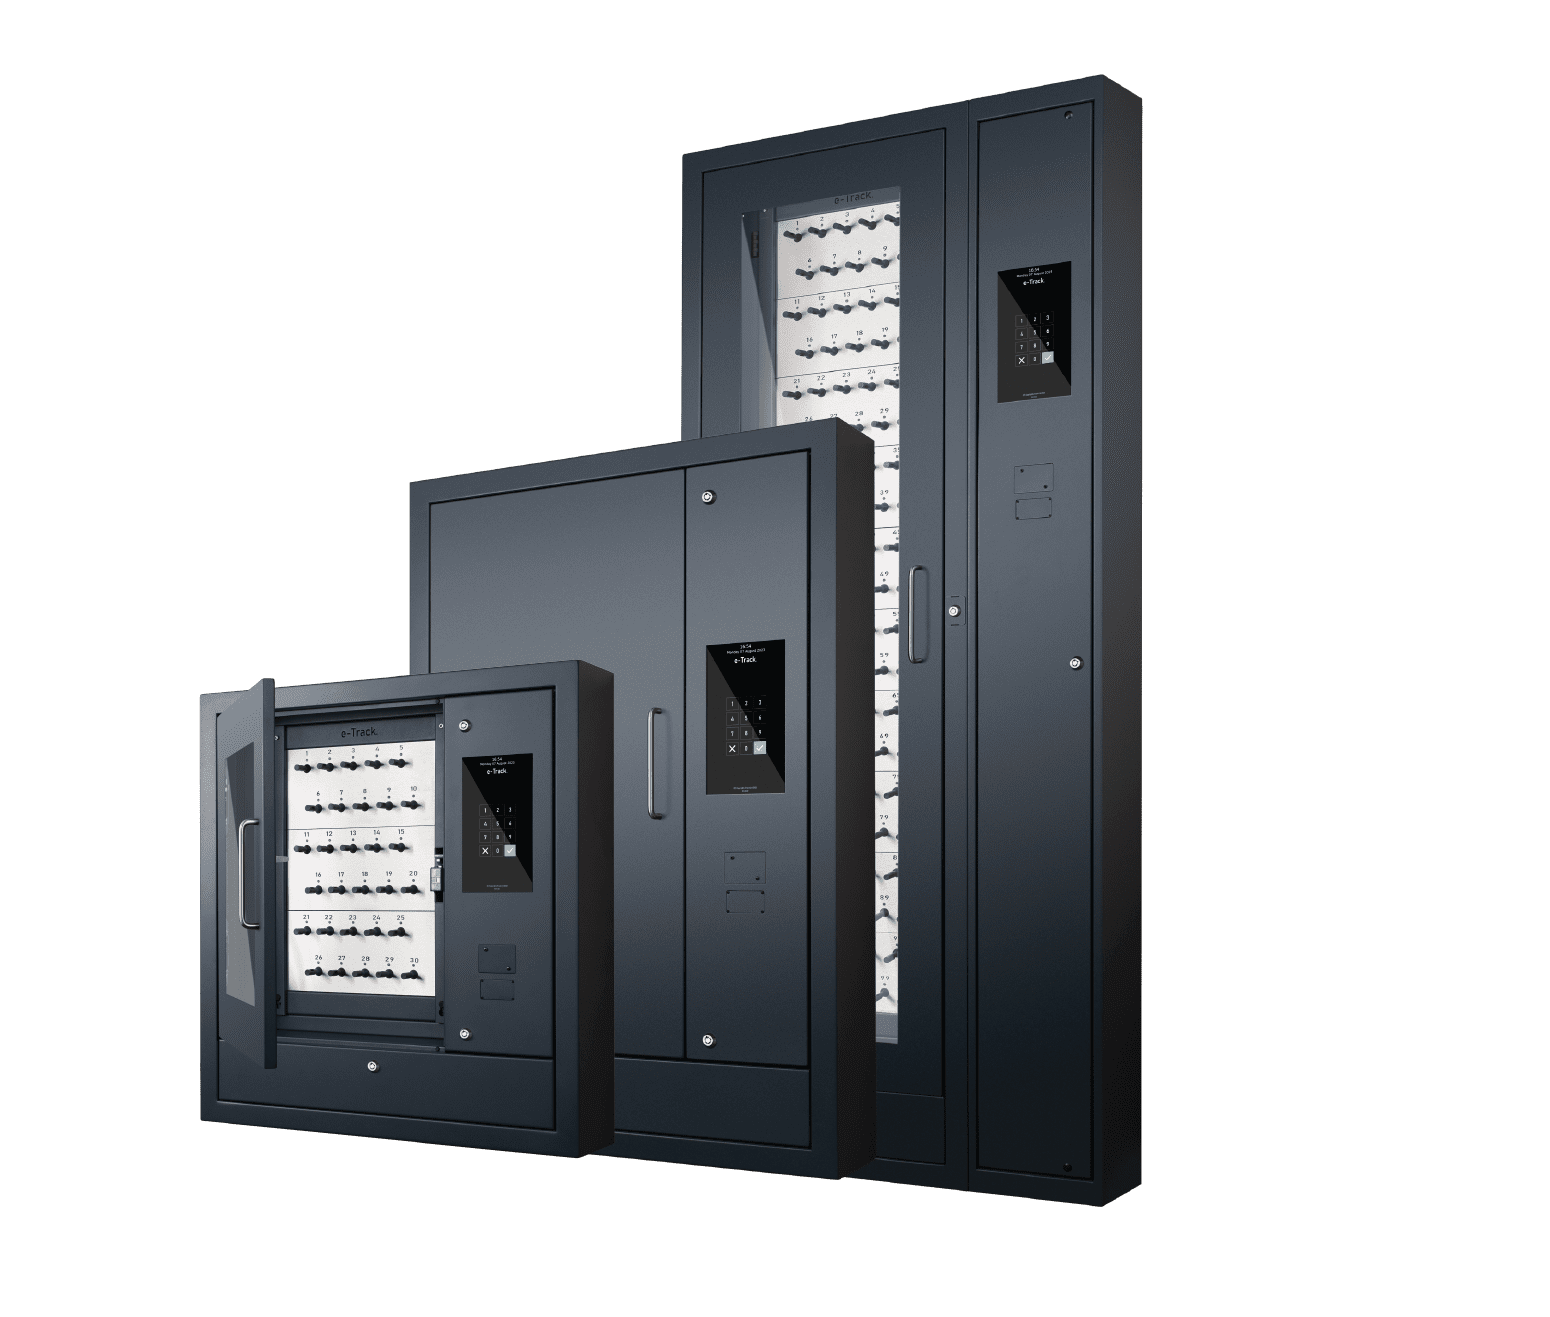 Core Electronic Key Cabinet Range in size 30, 50, and 100